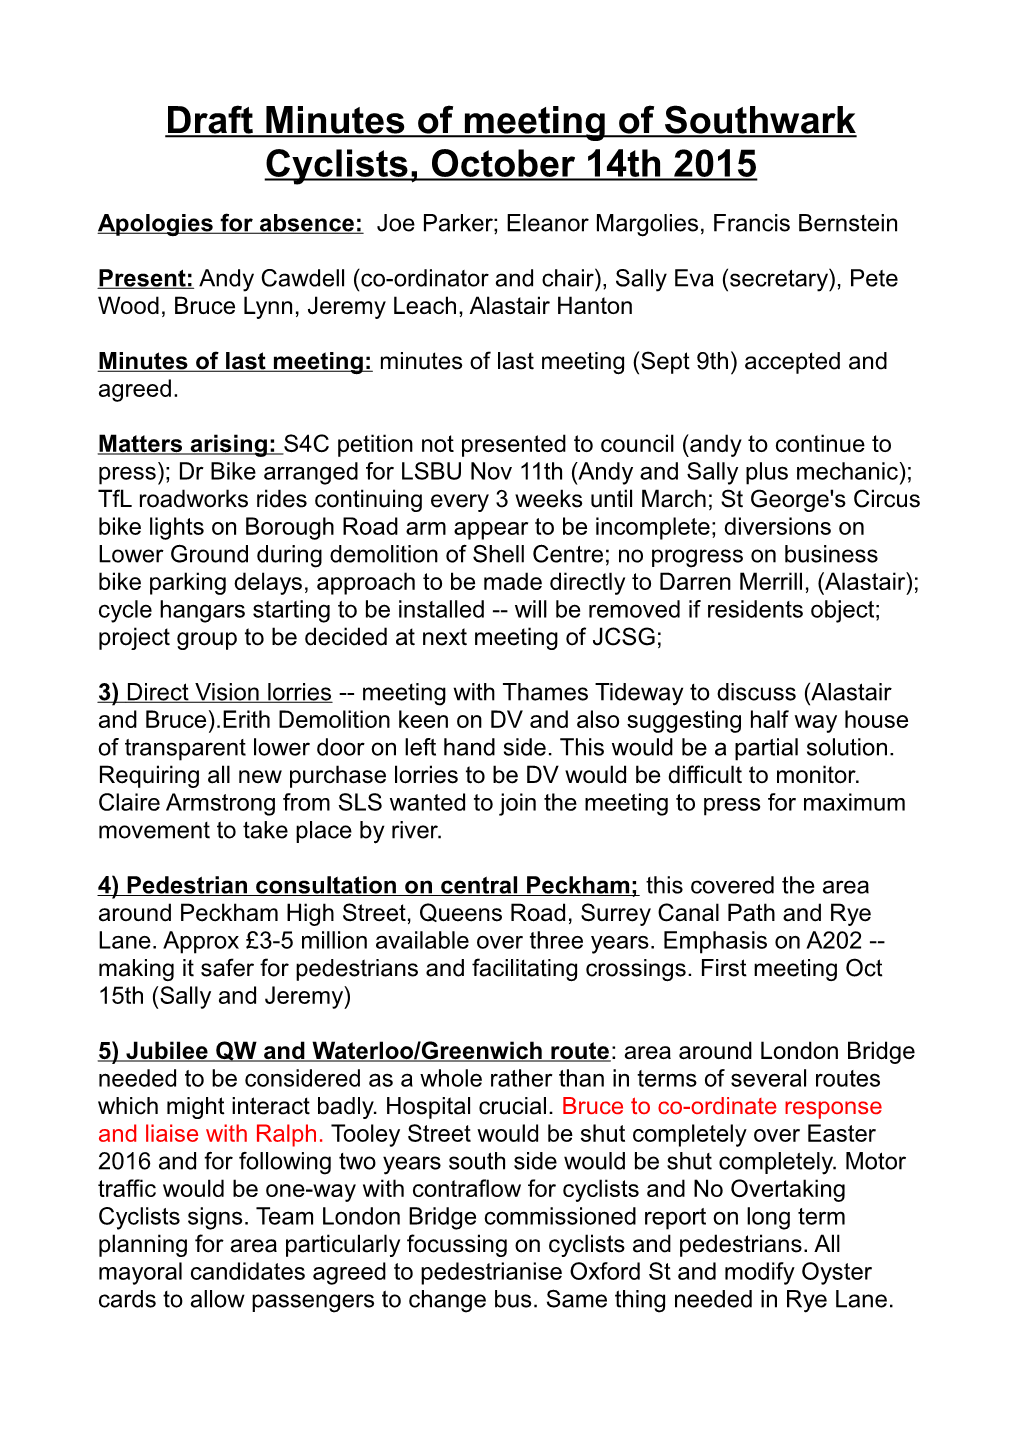 Draft Minutes of Meeting of Southwark Cyclists, October 14Th 2015